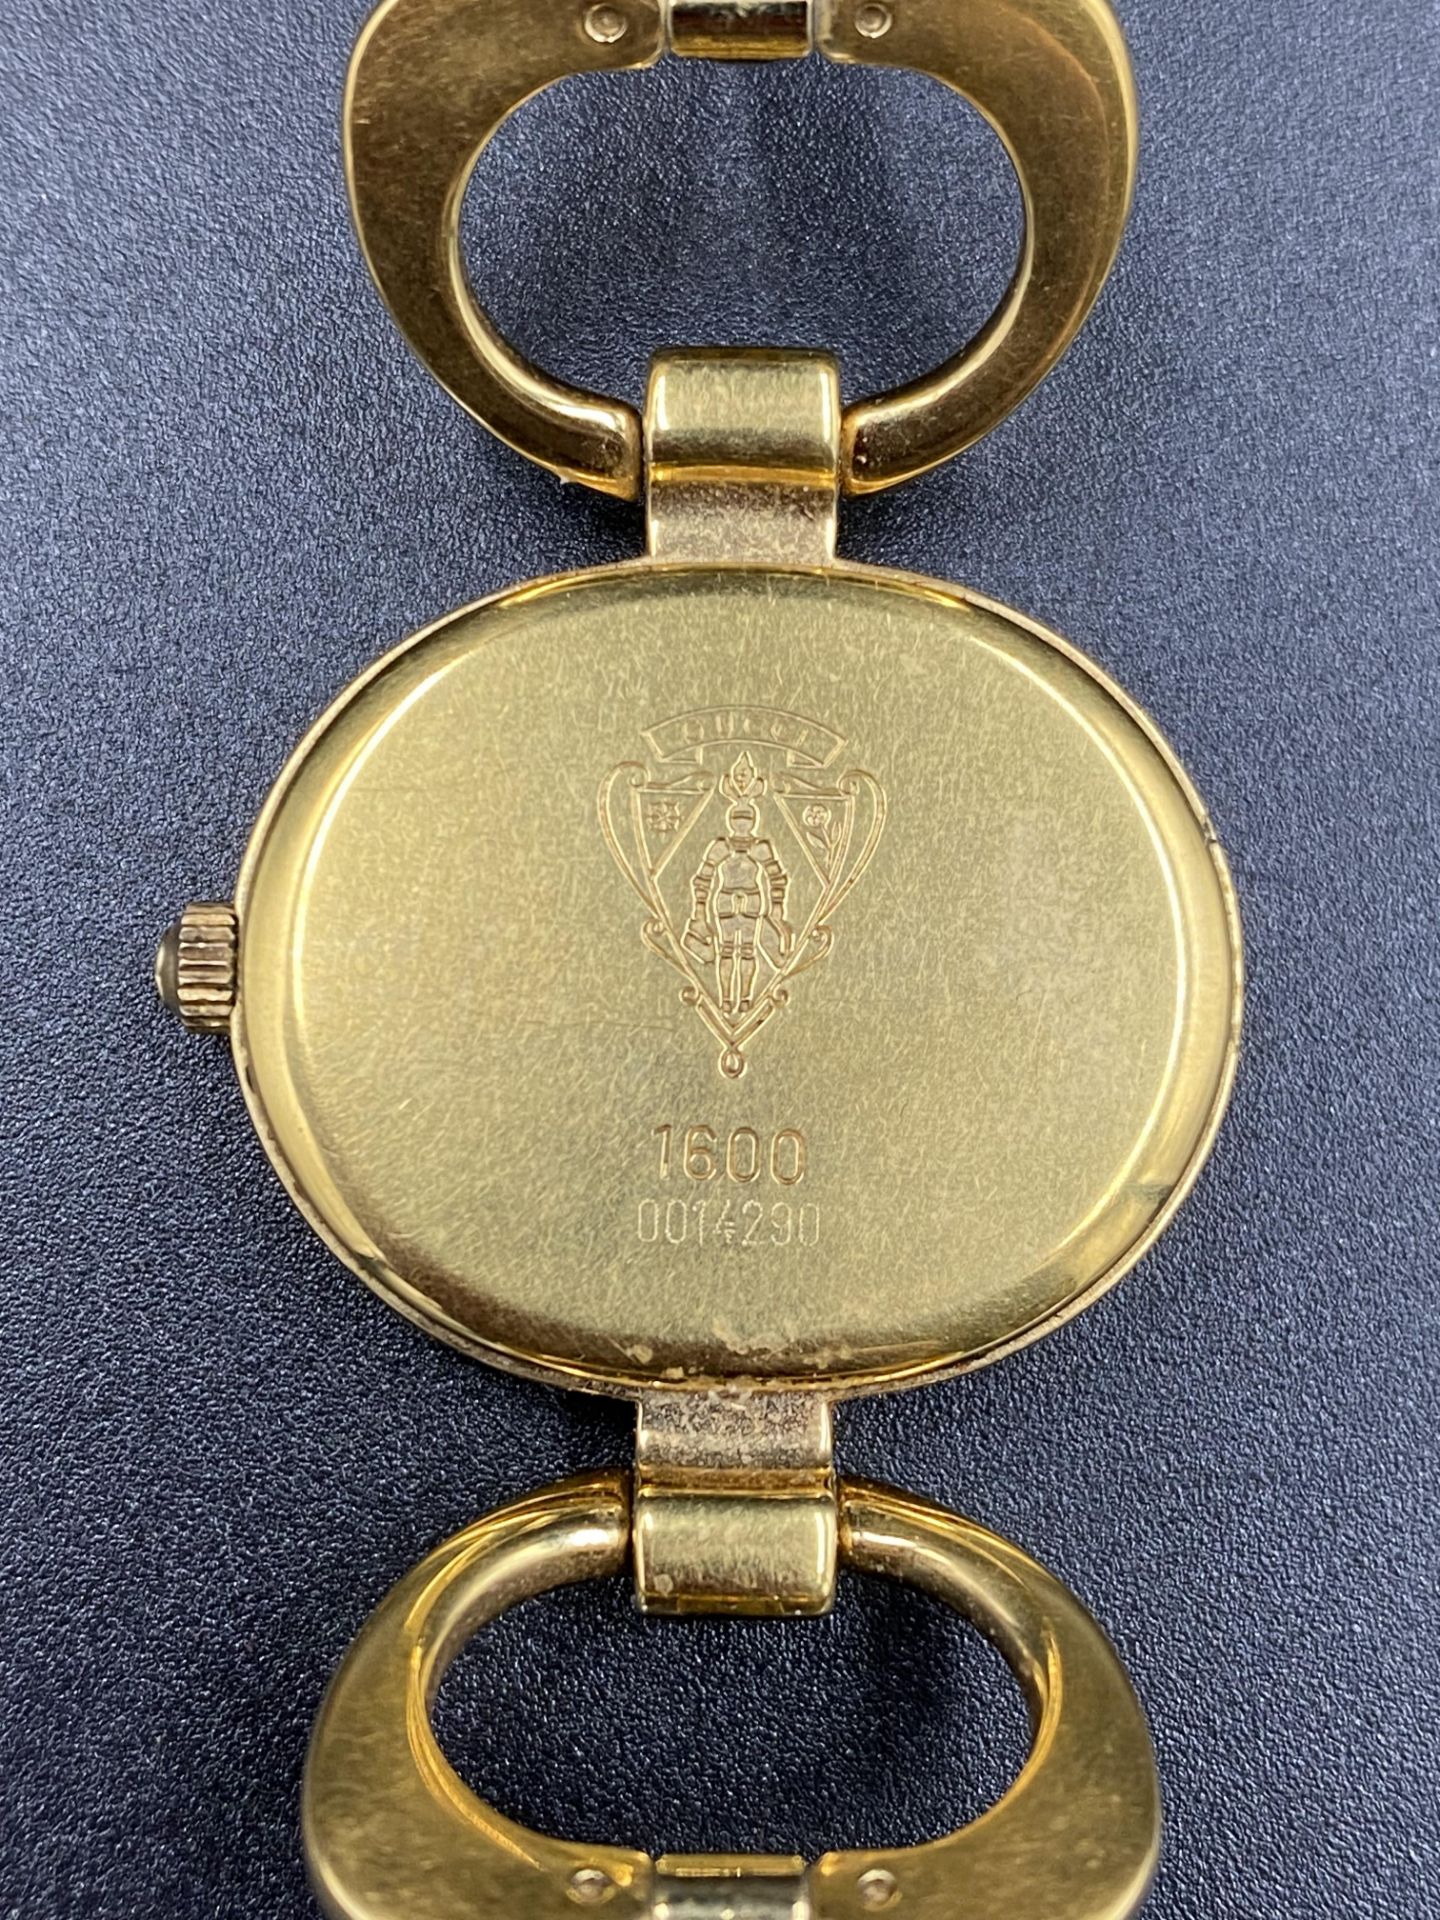 18ct gold ladies Gucci watch - Image 5 of 6